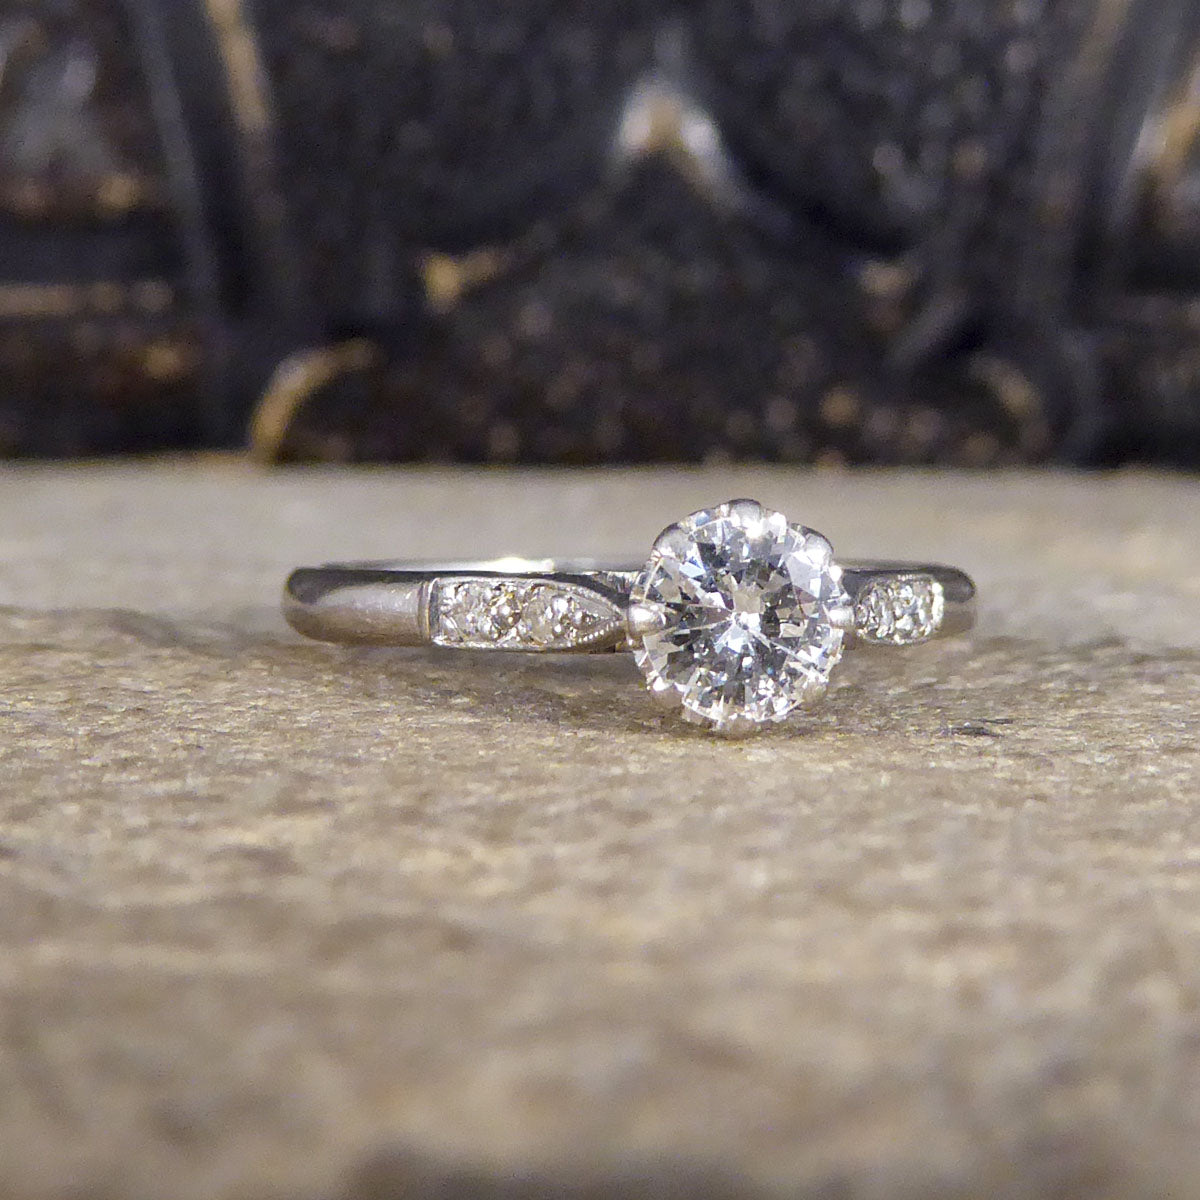 1930's Diamond Solitaire Ring with Diamond set Shoulders in 18ct White Gold and Platinum